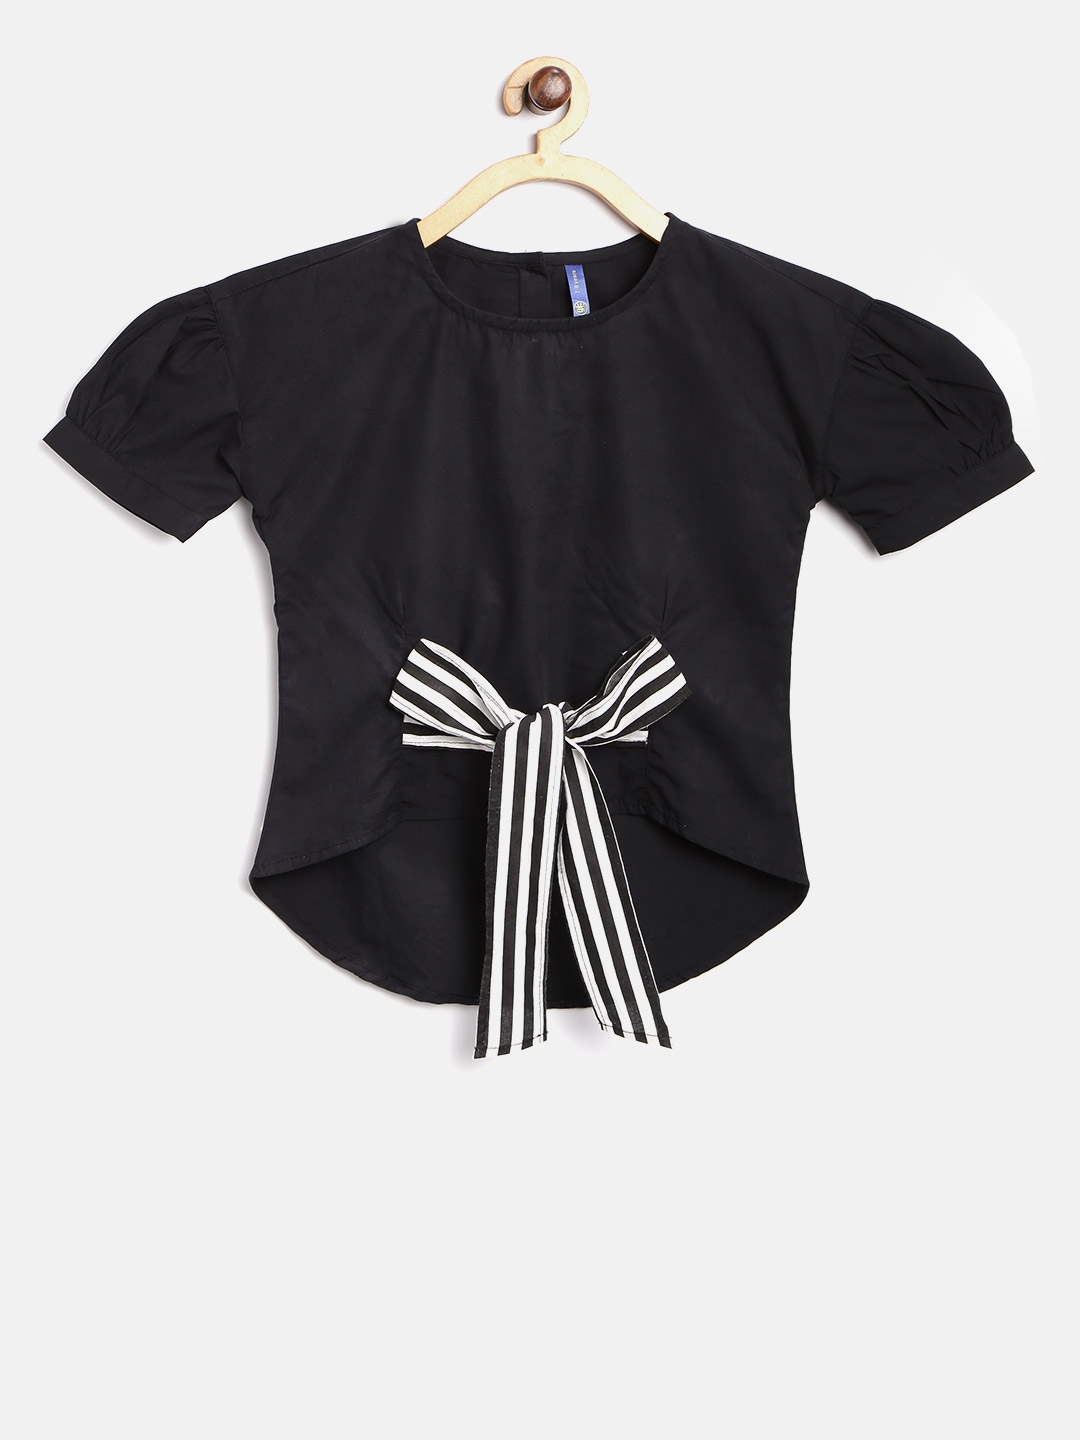 Buy YK Girls Black Solid High Low Pure Cotton Top - Tops for Girls ...